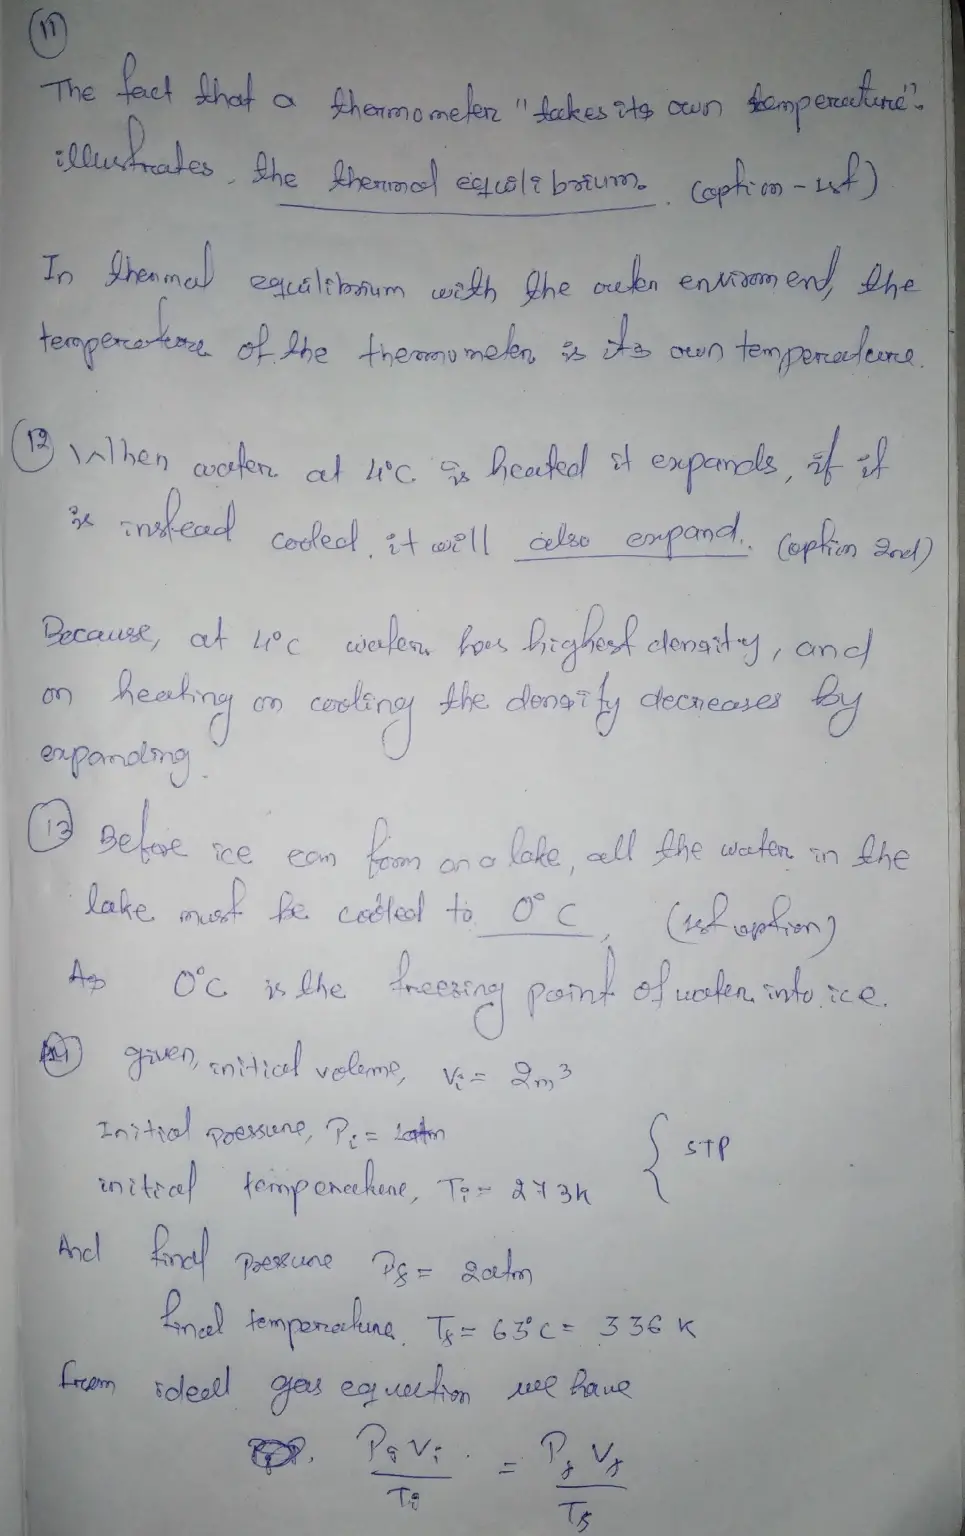 #11-14

QUESTION 11 The fact that a thermometer takes its own temperature illustrates - thermal equilibrium. energy conservation the difference between heat and internal energy o the fact that molecules are constantly moving. QUESTION 12 When water at 4°C is heated it expands. If it is instead cooled it will O contracts also expand o neither contracts nor expands QUESTION 13 Before ice can form on a lake, all the water in the lake must be cooled to O 0°C O 4°C 0 -32°C. none of the above QUESTION 14 If a 2 m2 of gas initially at STP is placed under a pressure of 2 atm, the temperature of the gas rises to 63°C. What is the volume now? Calculate to 2 decimals.